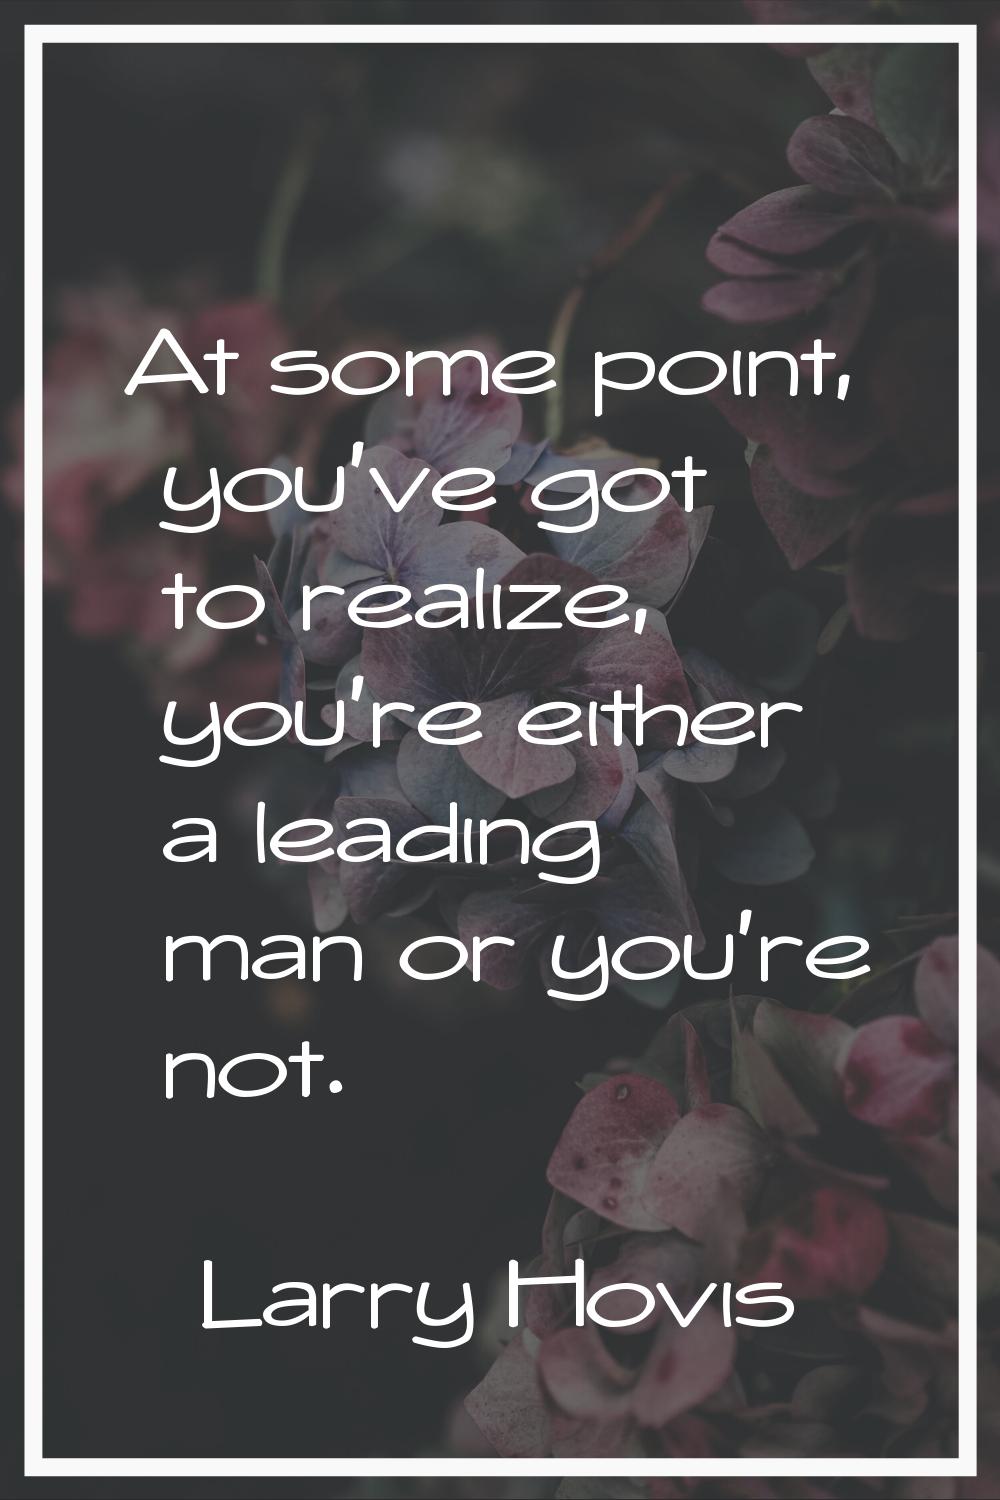 At some point, you've got to realize, you're either a leading man or you're not.